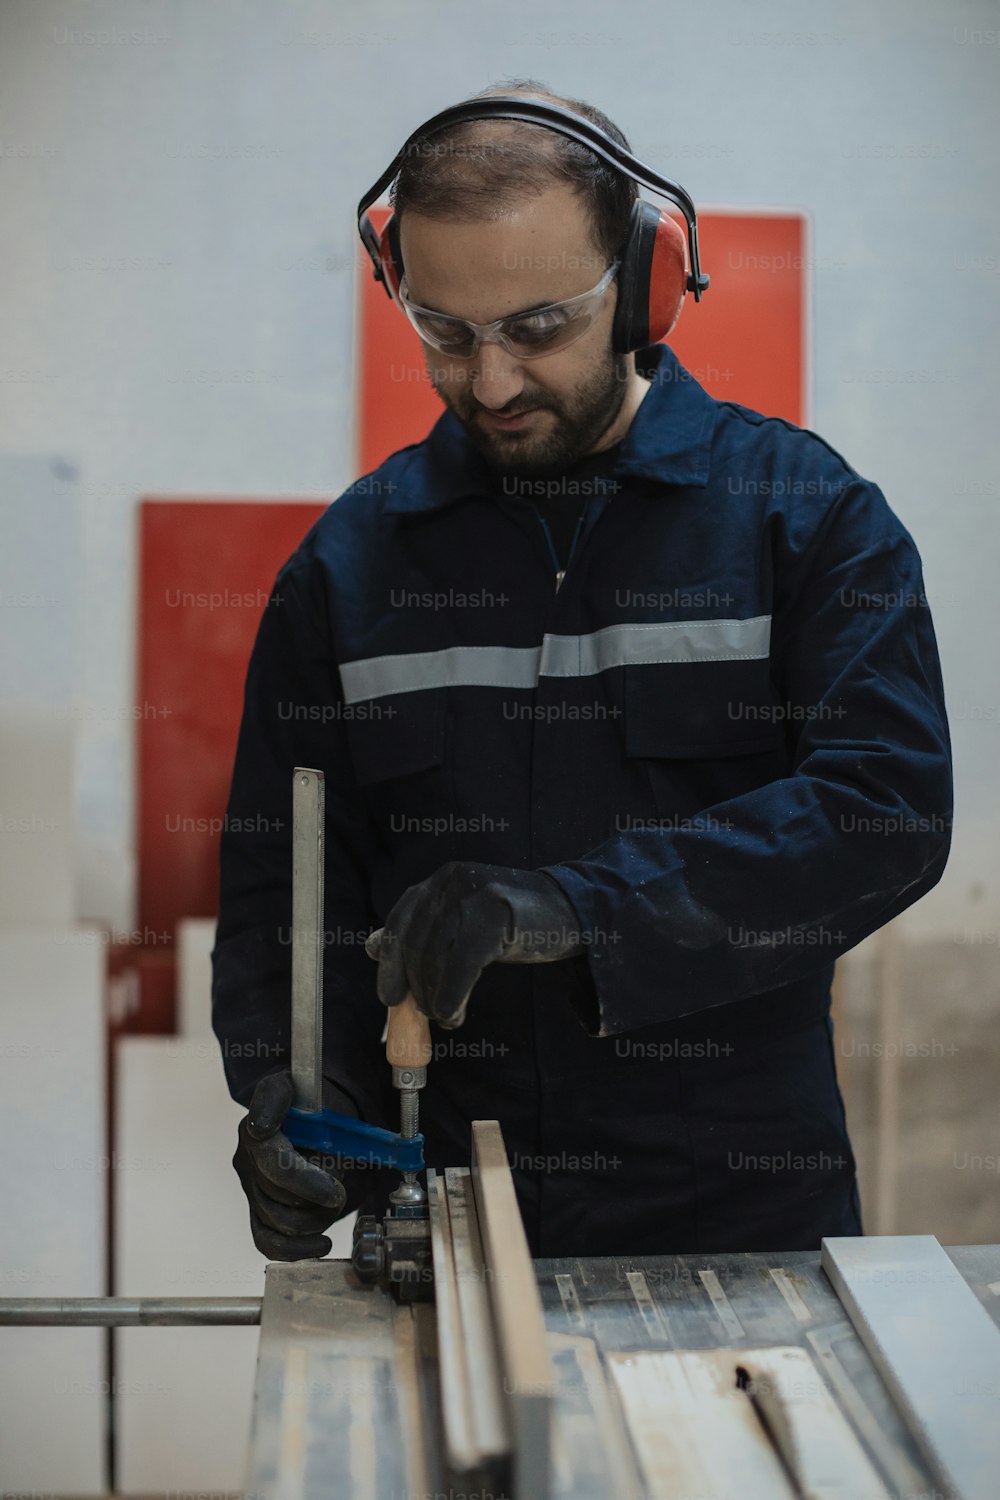 a man with headphones on working on a piece of wood